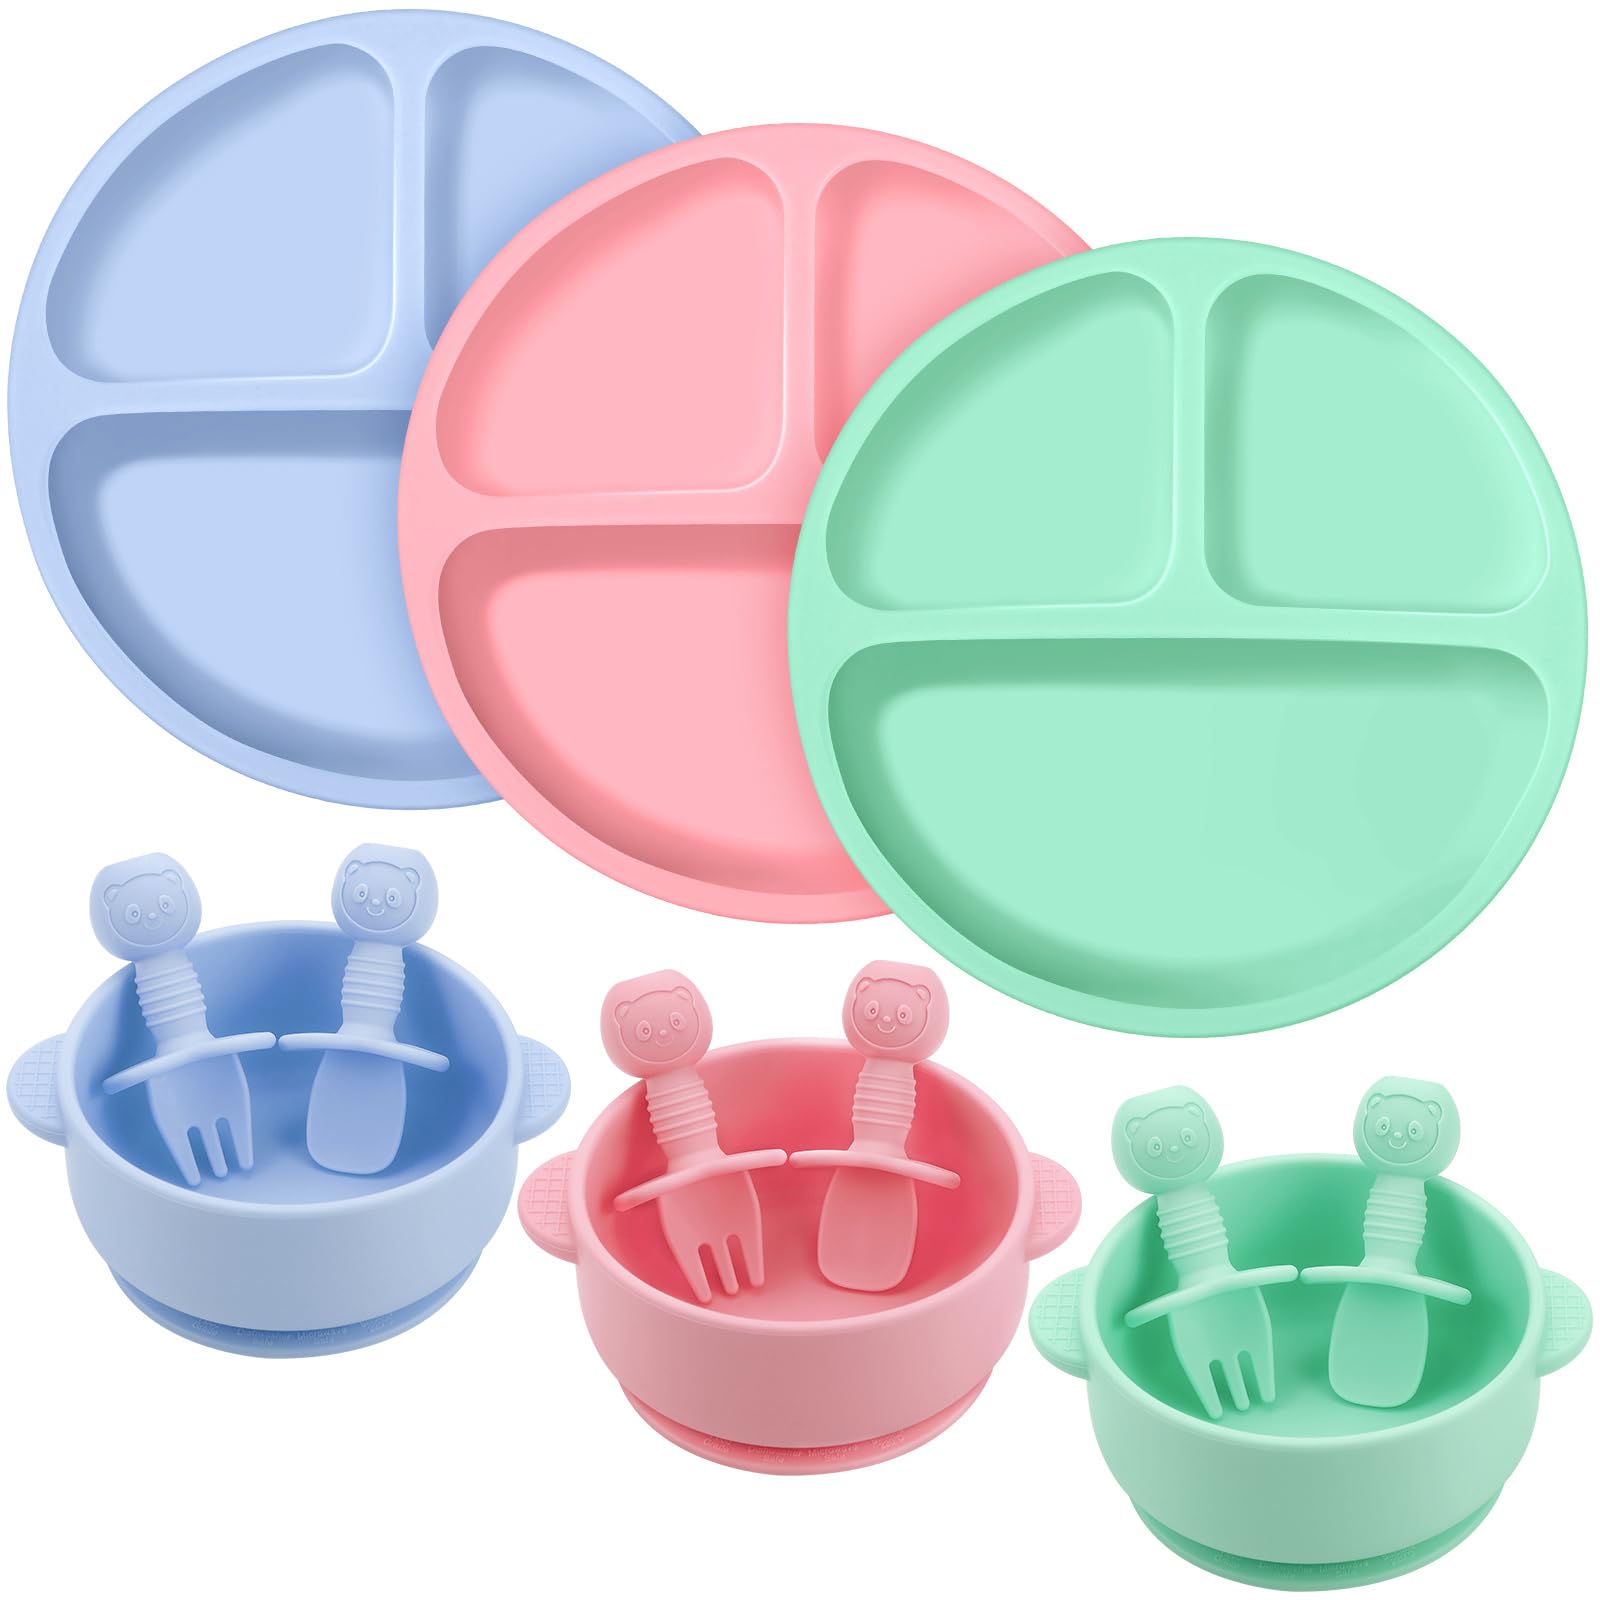 Pimoys 12 Pack Silicone Baby Suction Plates Baby Bowls Baby Feeding Set with Spoon Fork Baby Led Weaning Supplies Toddler Eating Utensils, Microwave & Dishwasher Safe